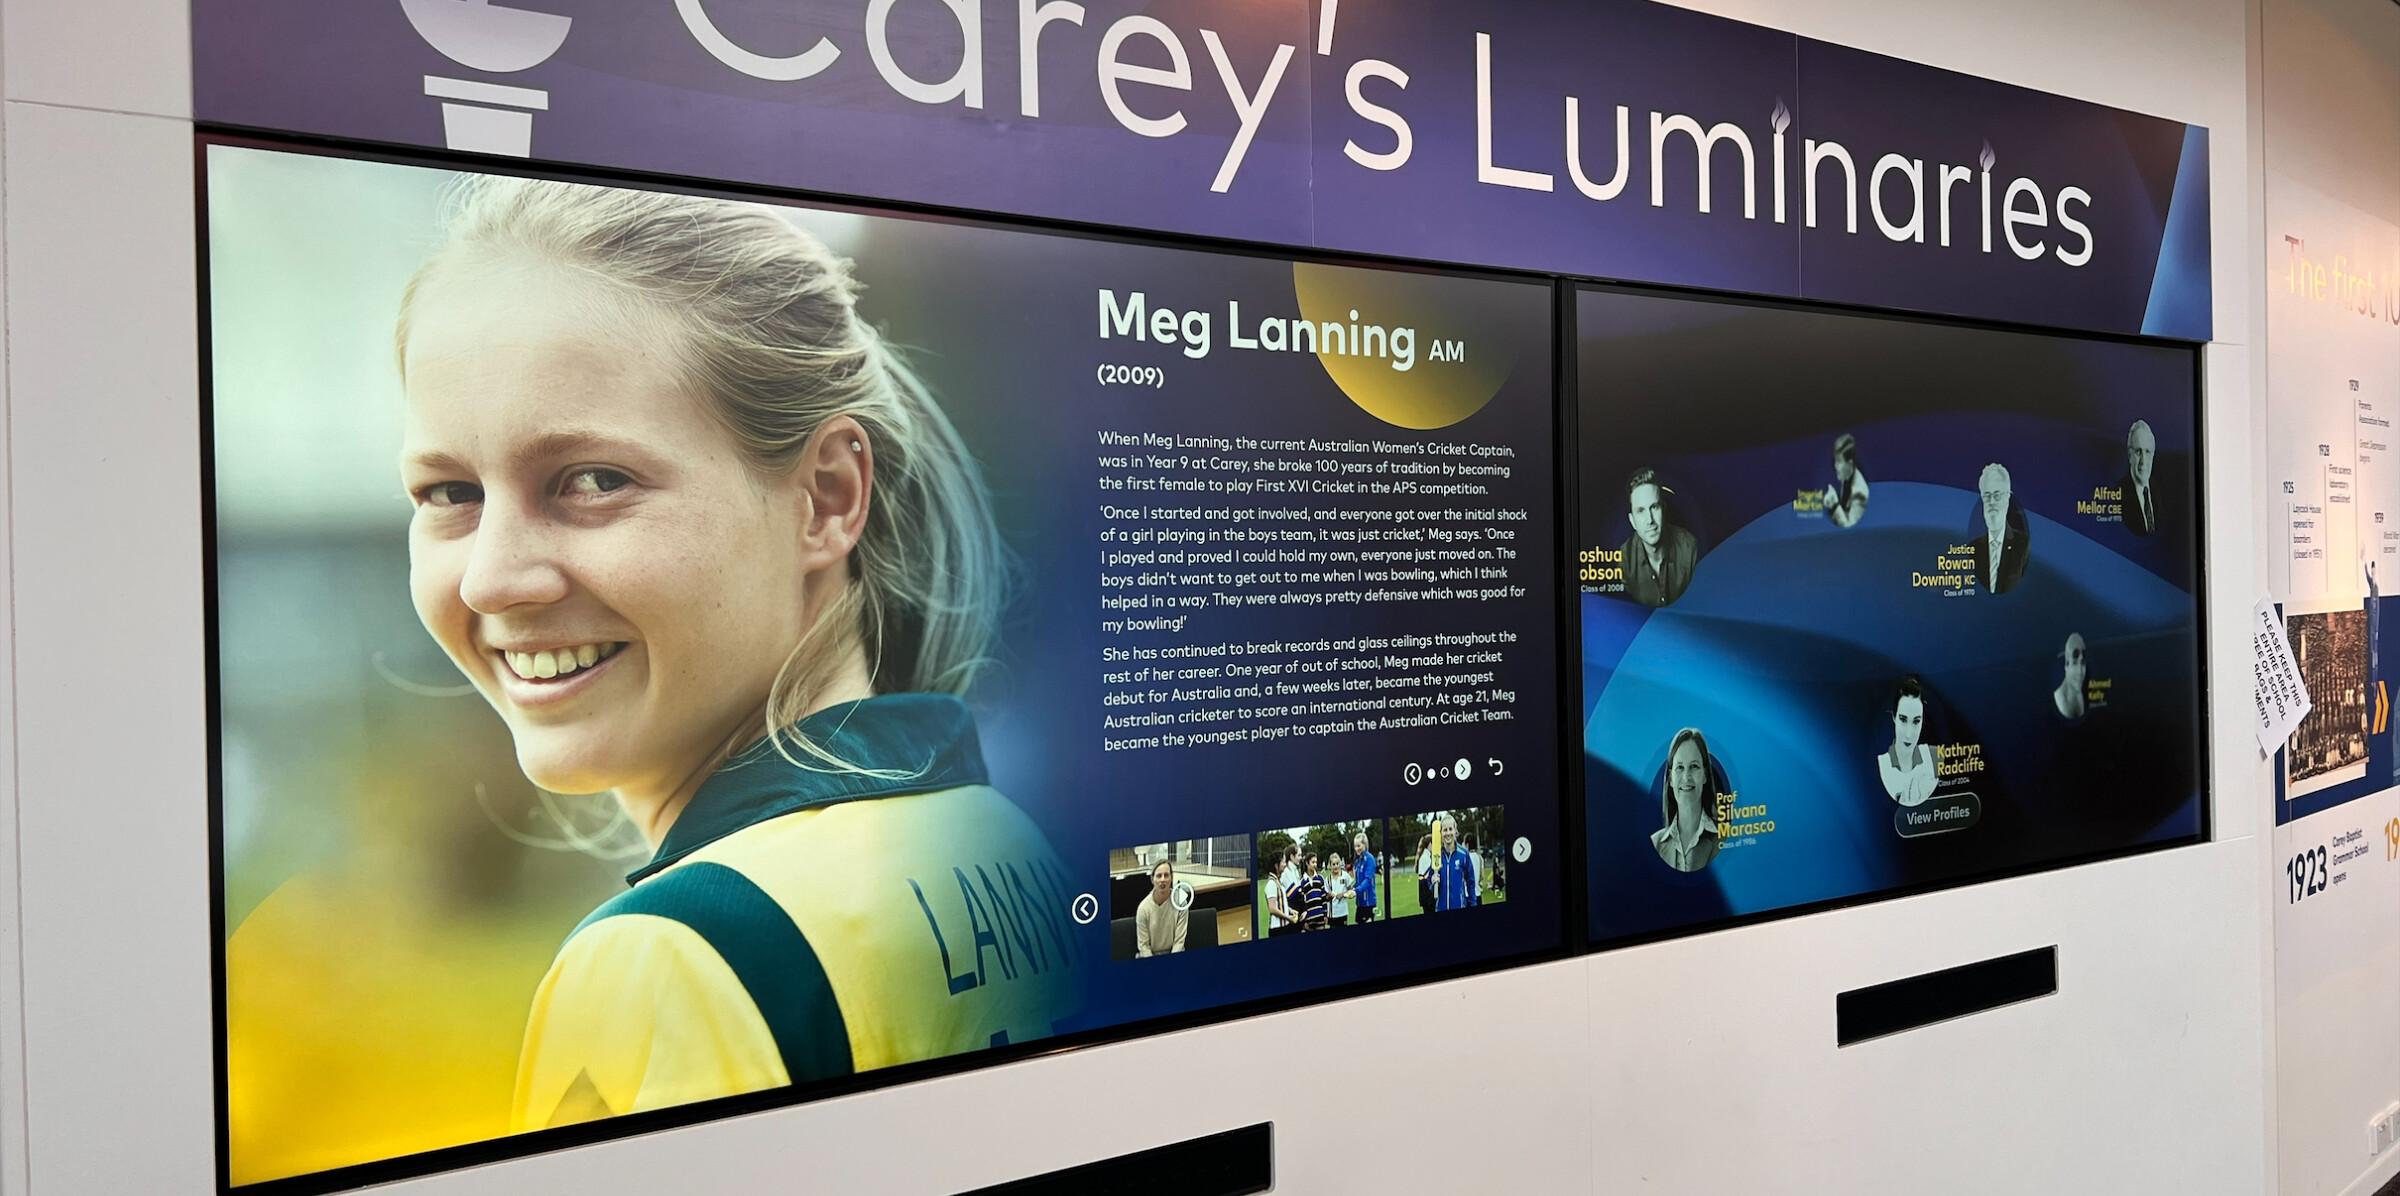 The launch of Carey’s Luminaries: celebrating our alumni